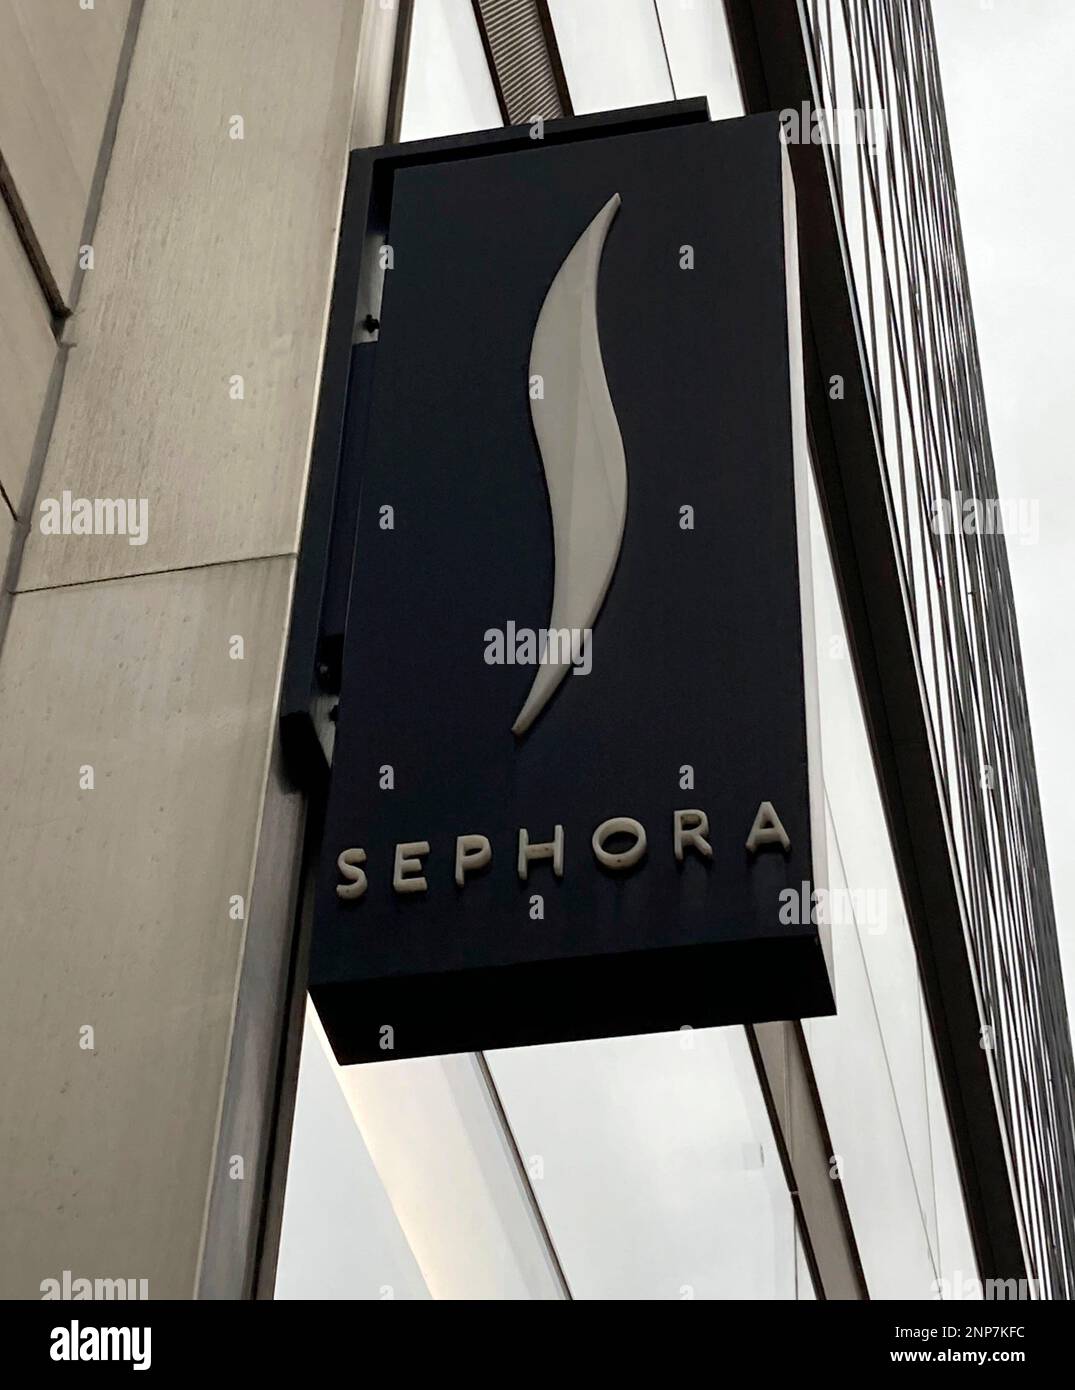 Kohl's to open 850 Sephora beauty shops in its stores by 2023